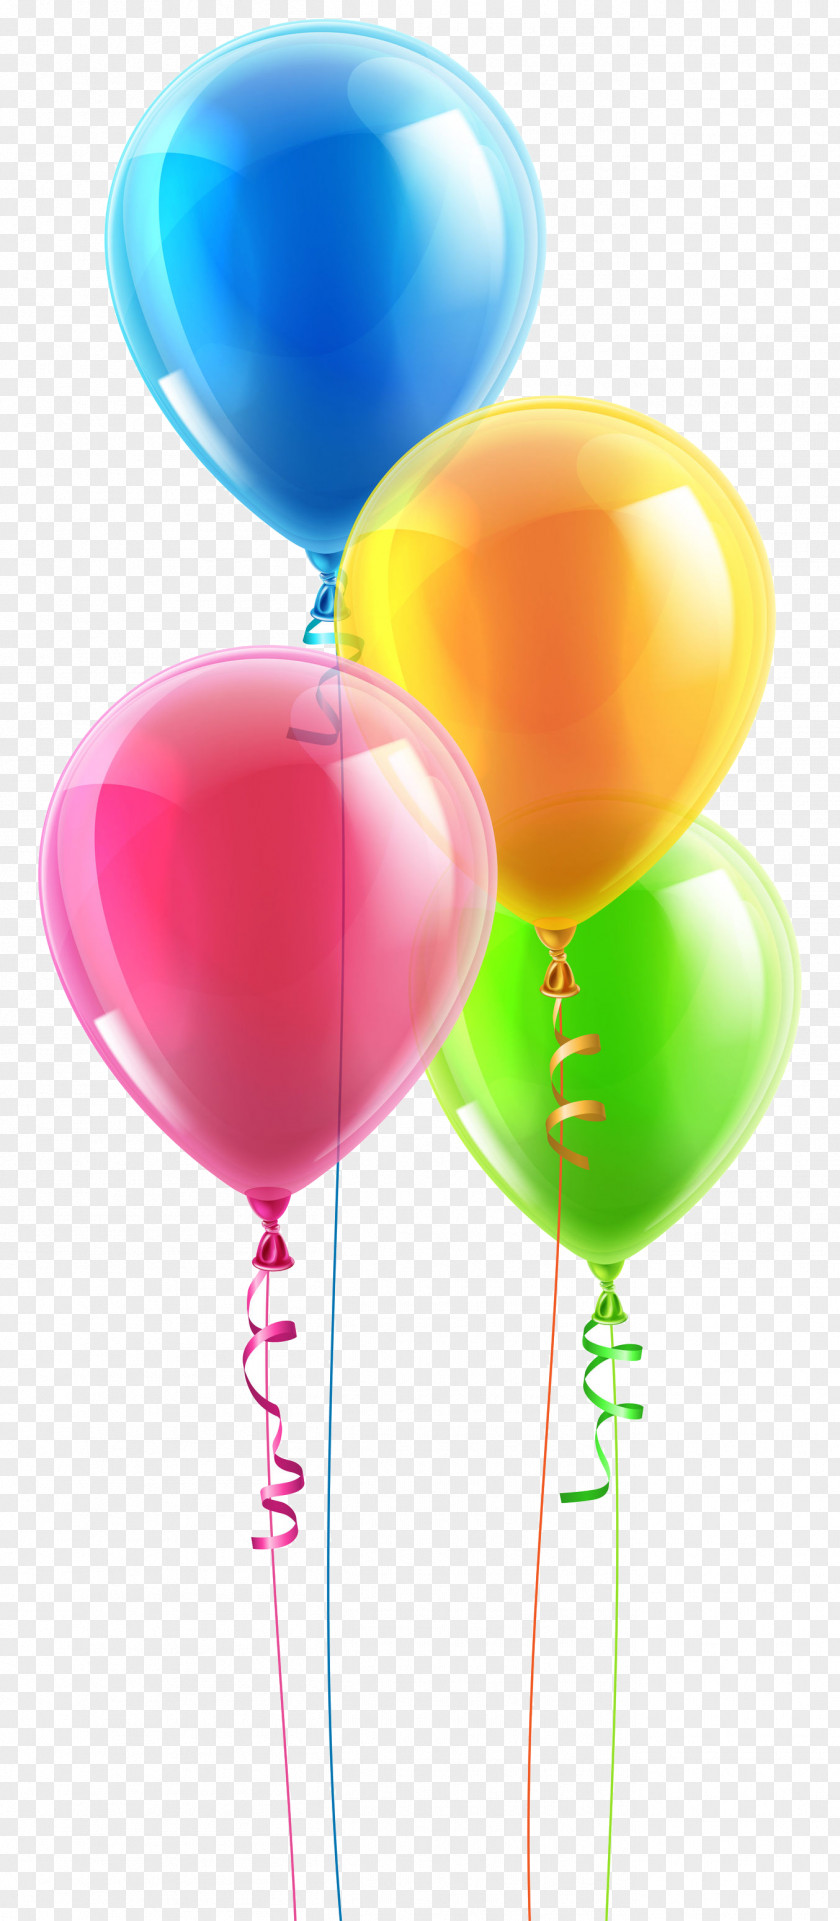 Balloon Stock Photography Illustration Royalty-free Clip Art PNG